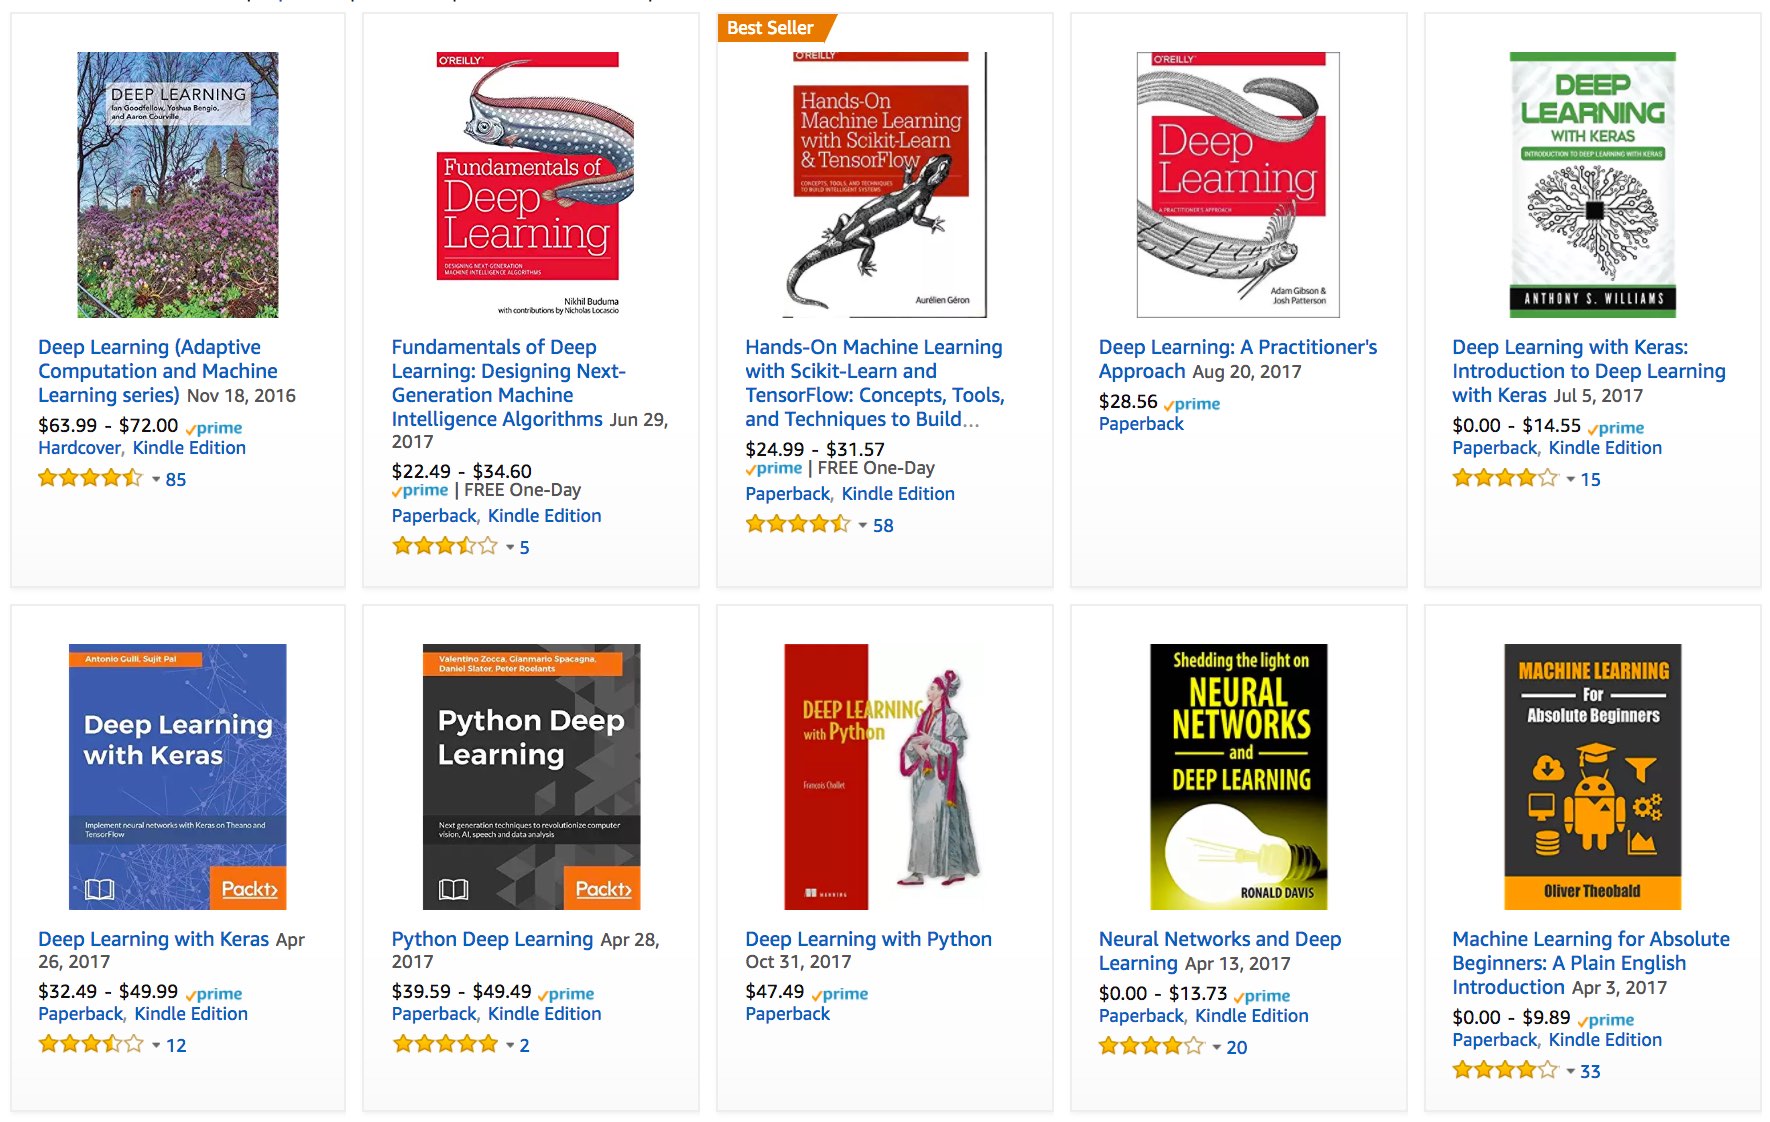 Deep learning books recommended by Amazon.